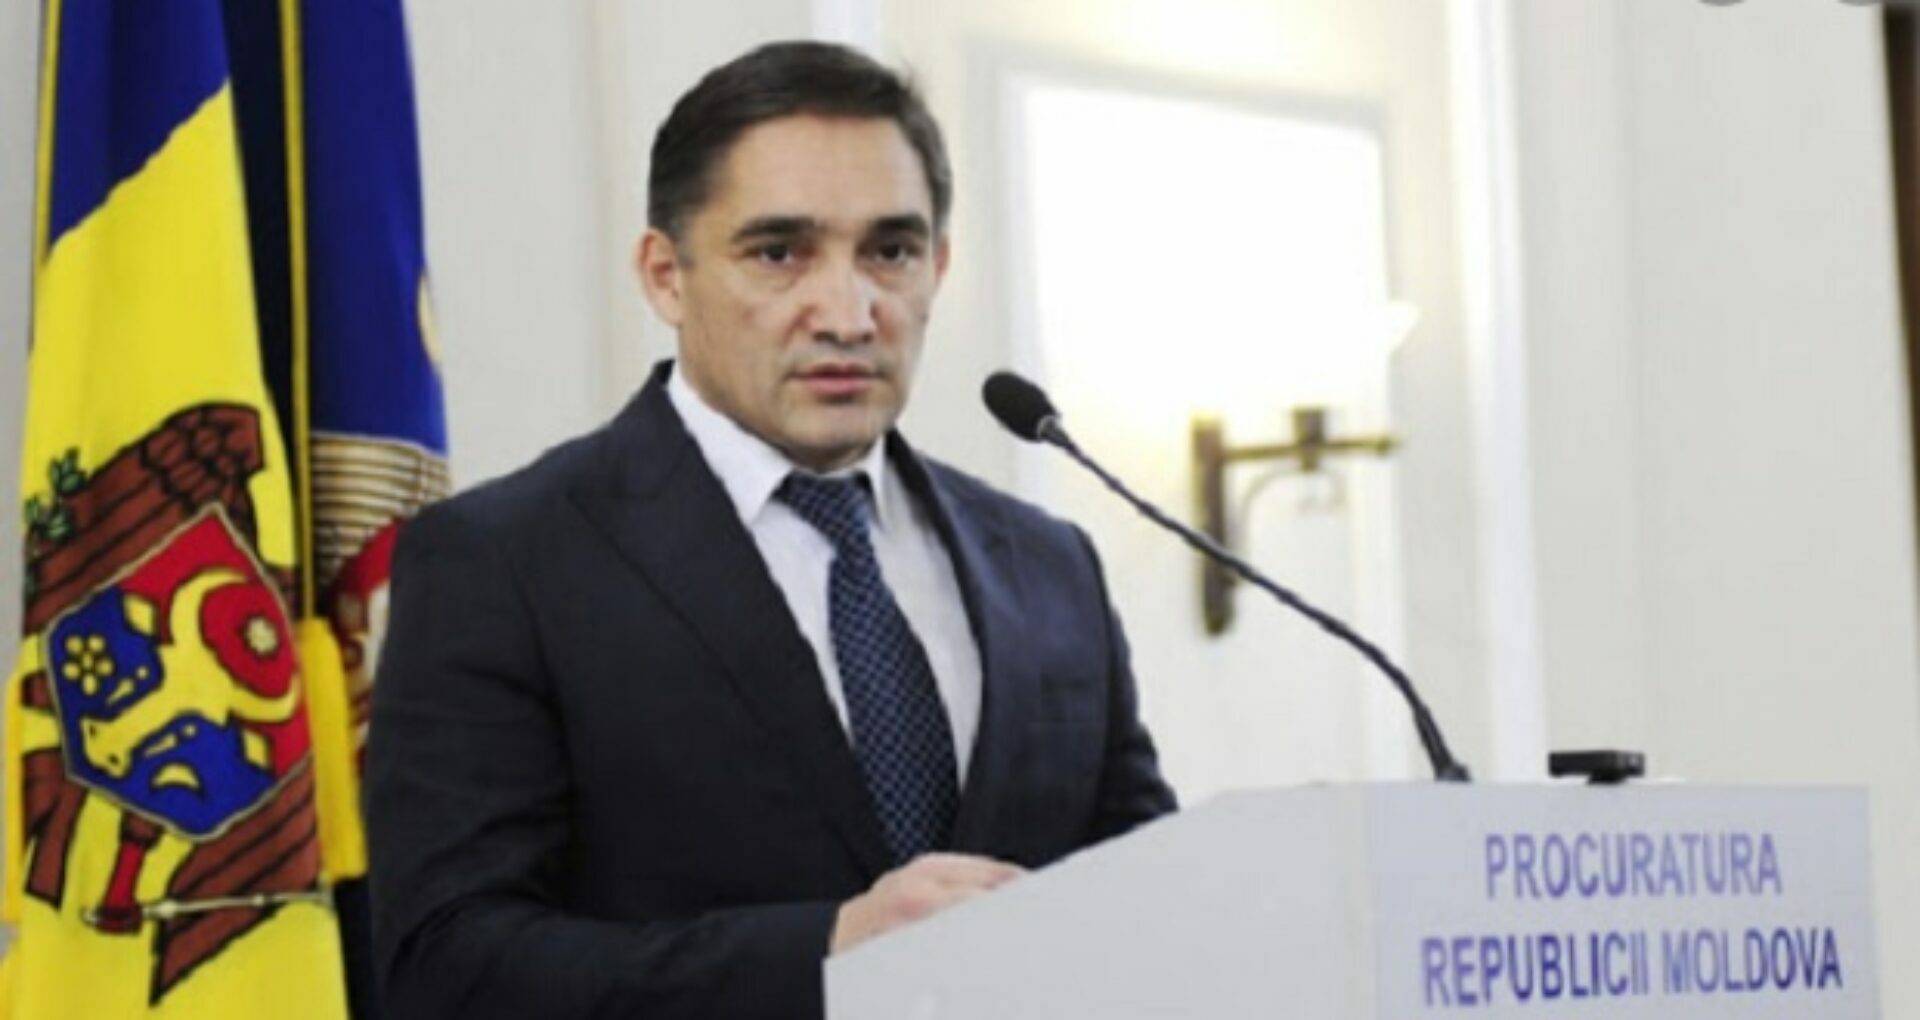 Prosecutor General Alexandr Stoianoglo Commenting the Magistrates of the Chișinău Court, Ciocana Office about the Pressures from the Prosecutors